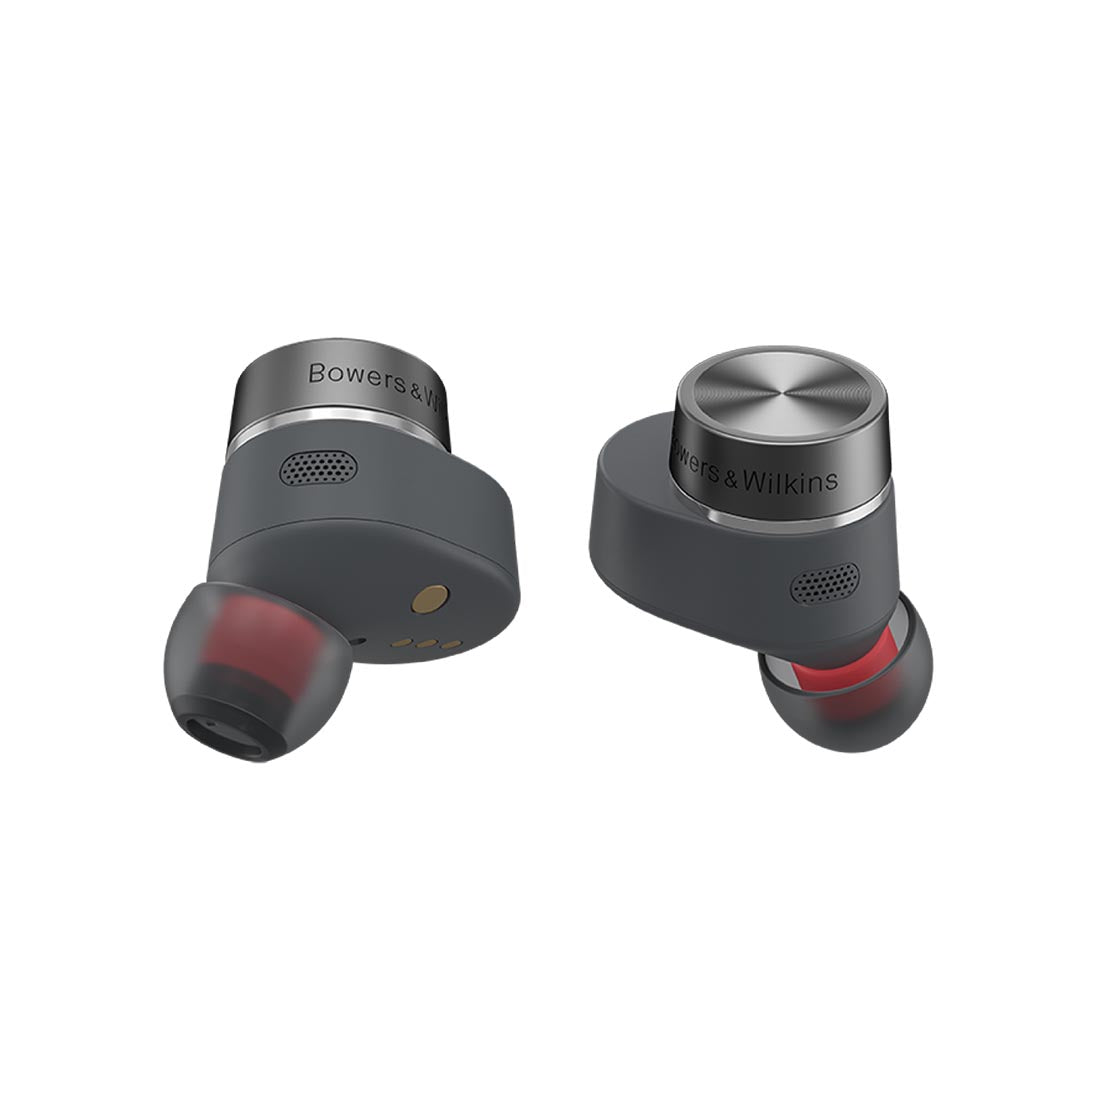 Bowers and Wilkins Pi5 S2 earbuds in Storm Grey